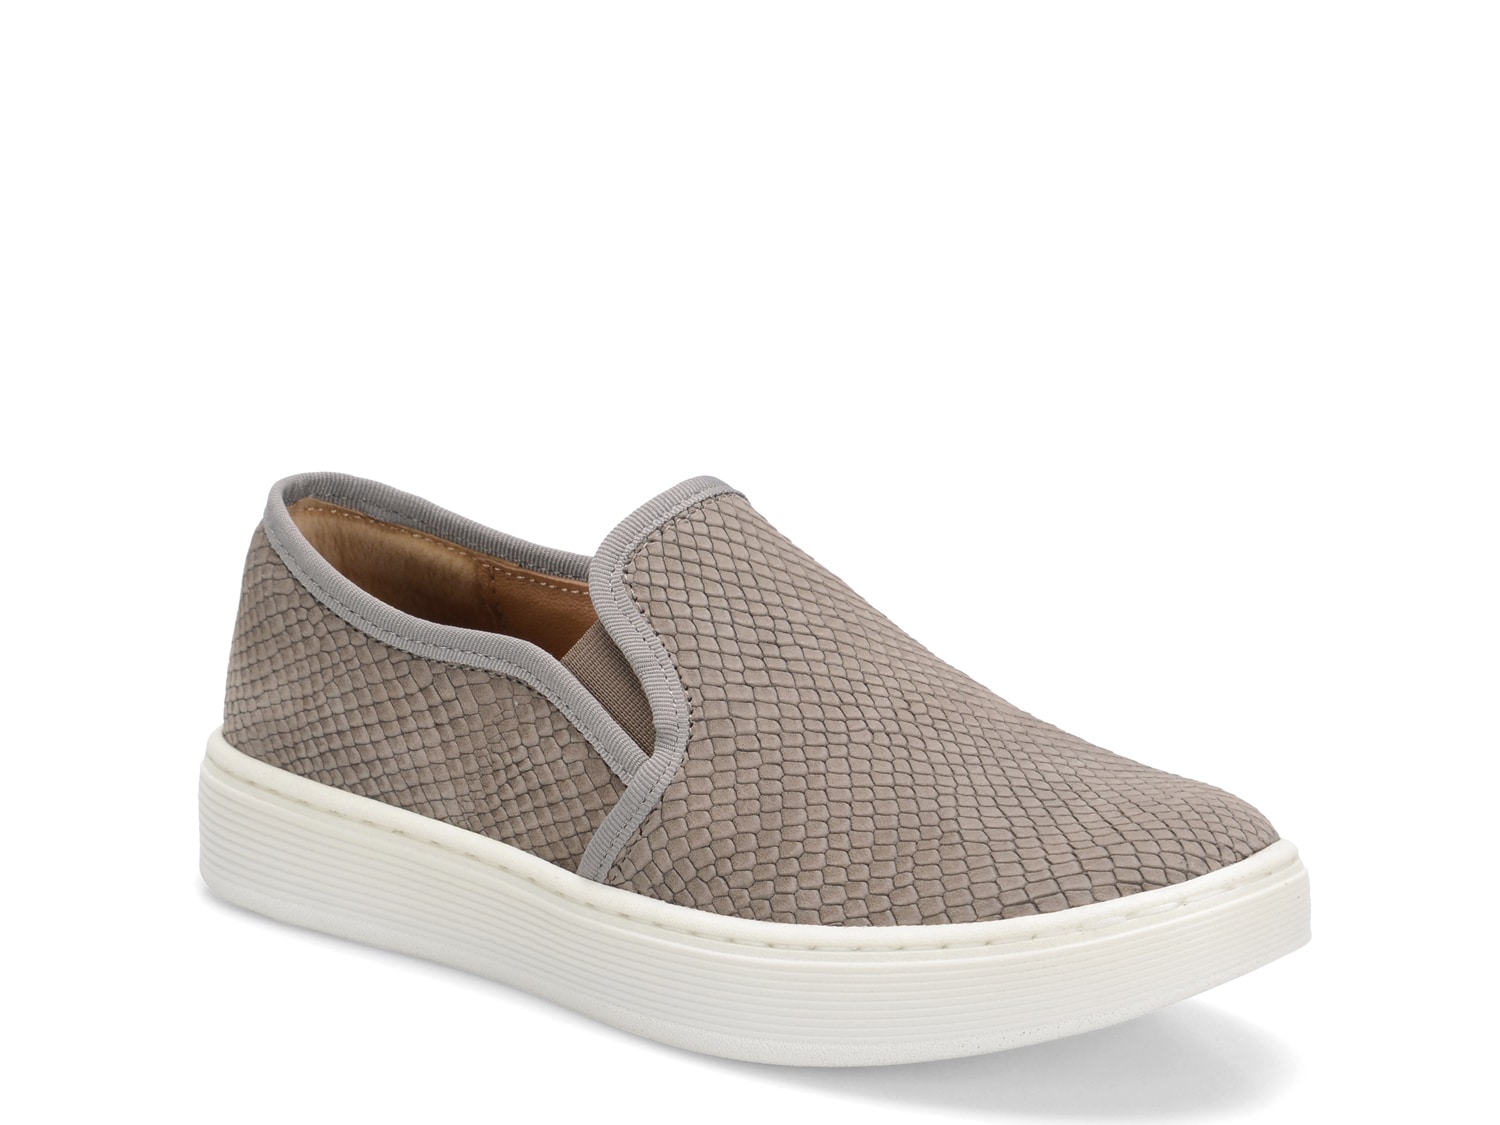 Sofft Somers Slip-On Sneaker - Free Shipping | DSW